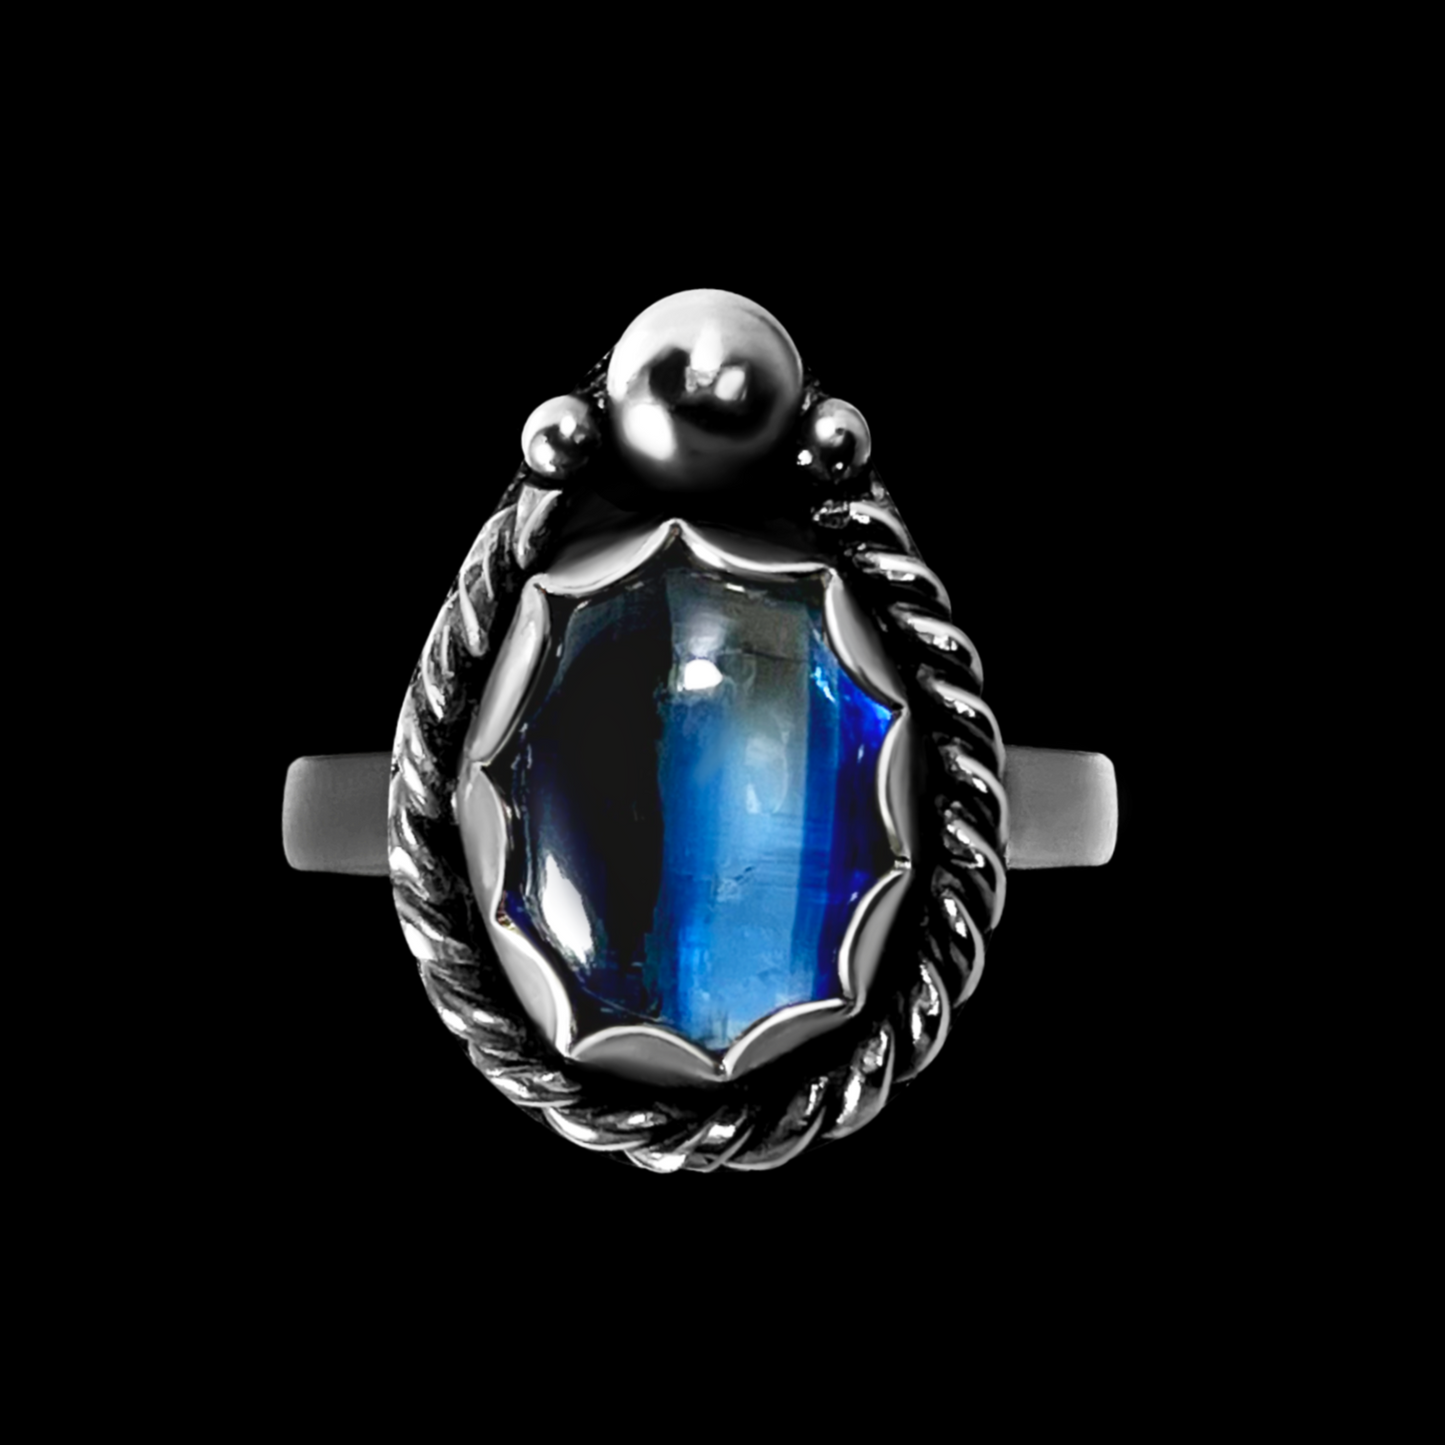 "Pthalo" Handmade Kyanite and Sterling Silver Ring